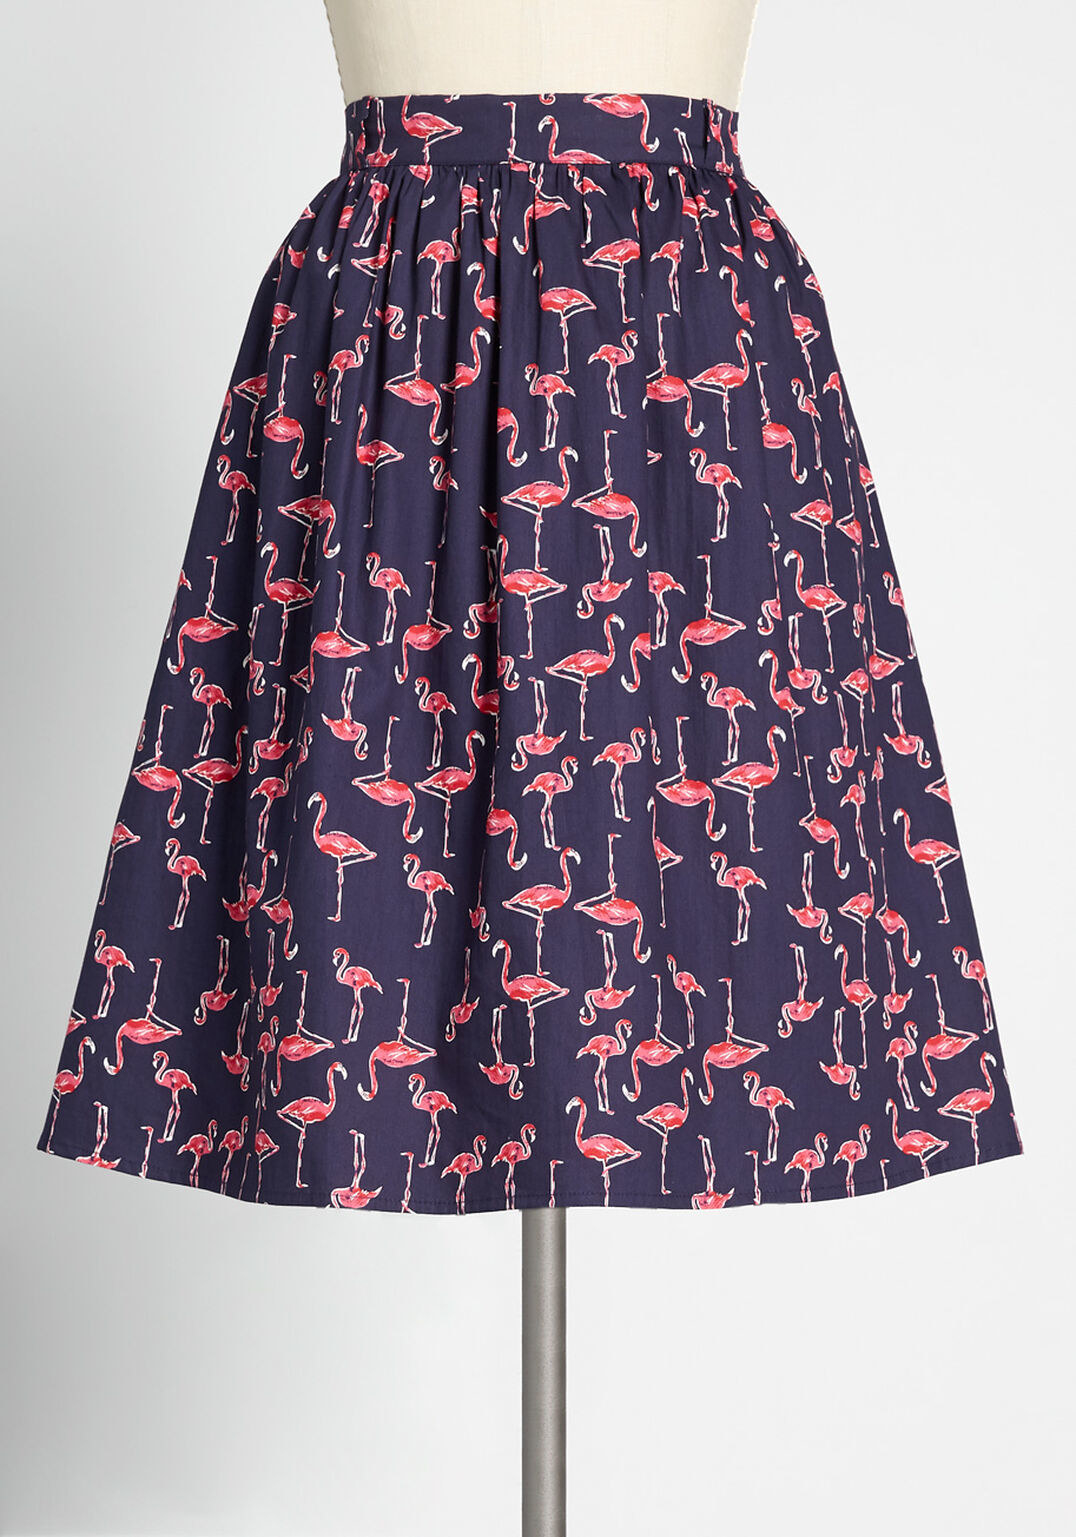 a navy blue skirt with an all-over flamingo patter